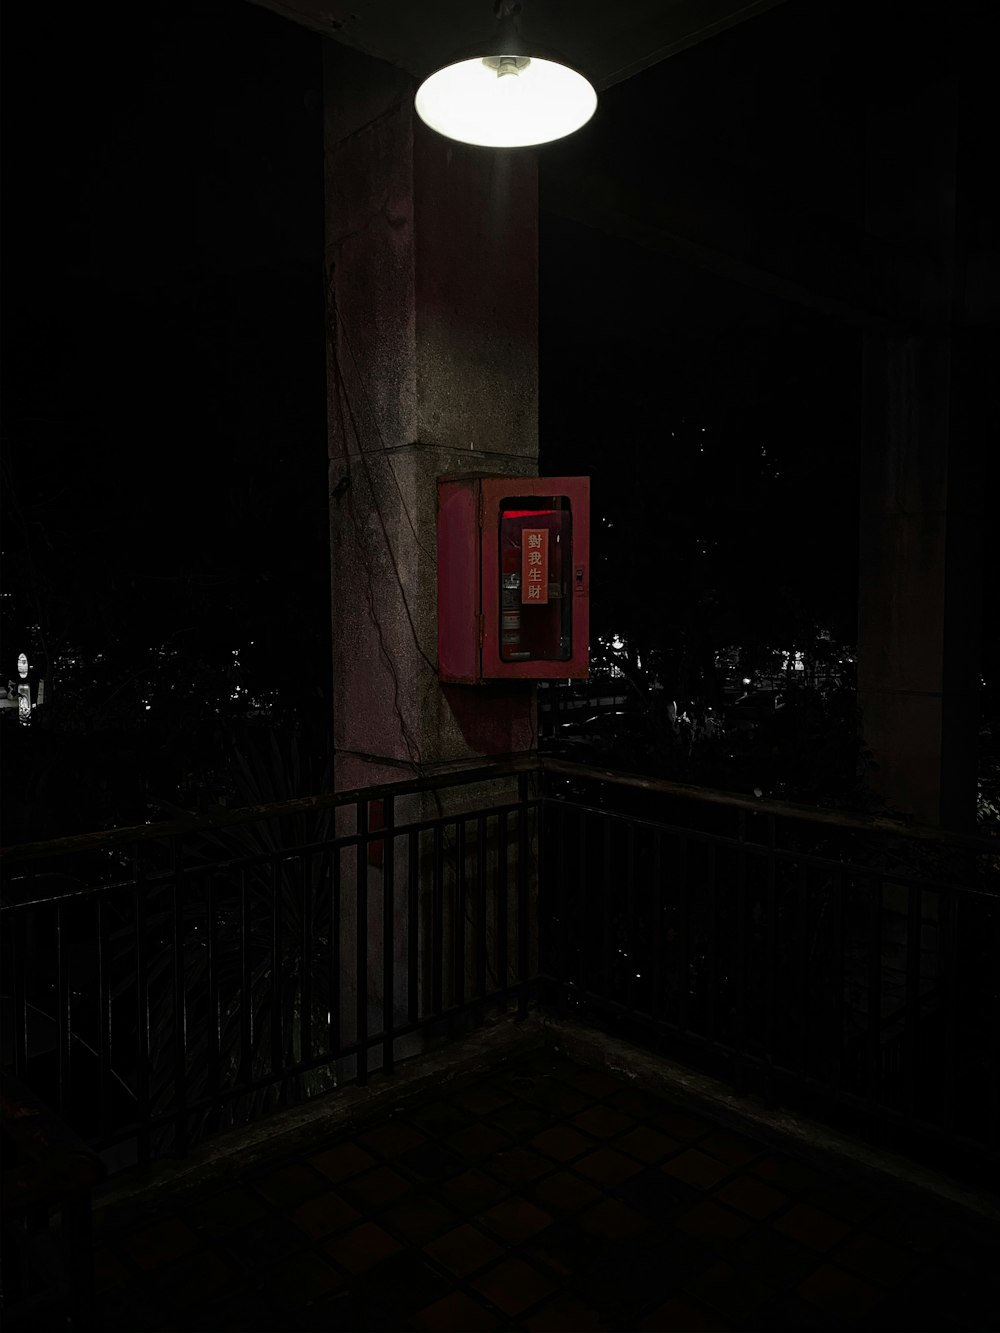 red telephone booth near green trees during night time